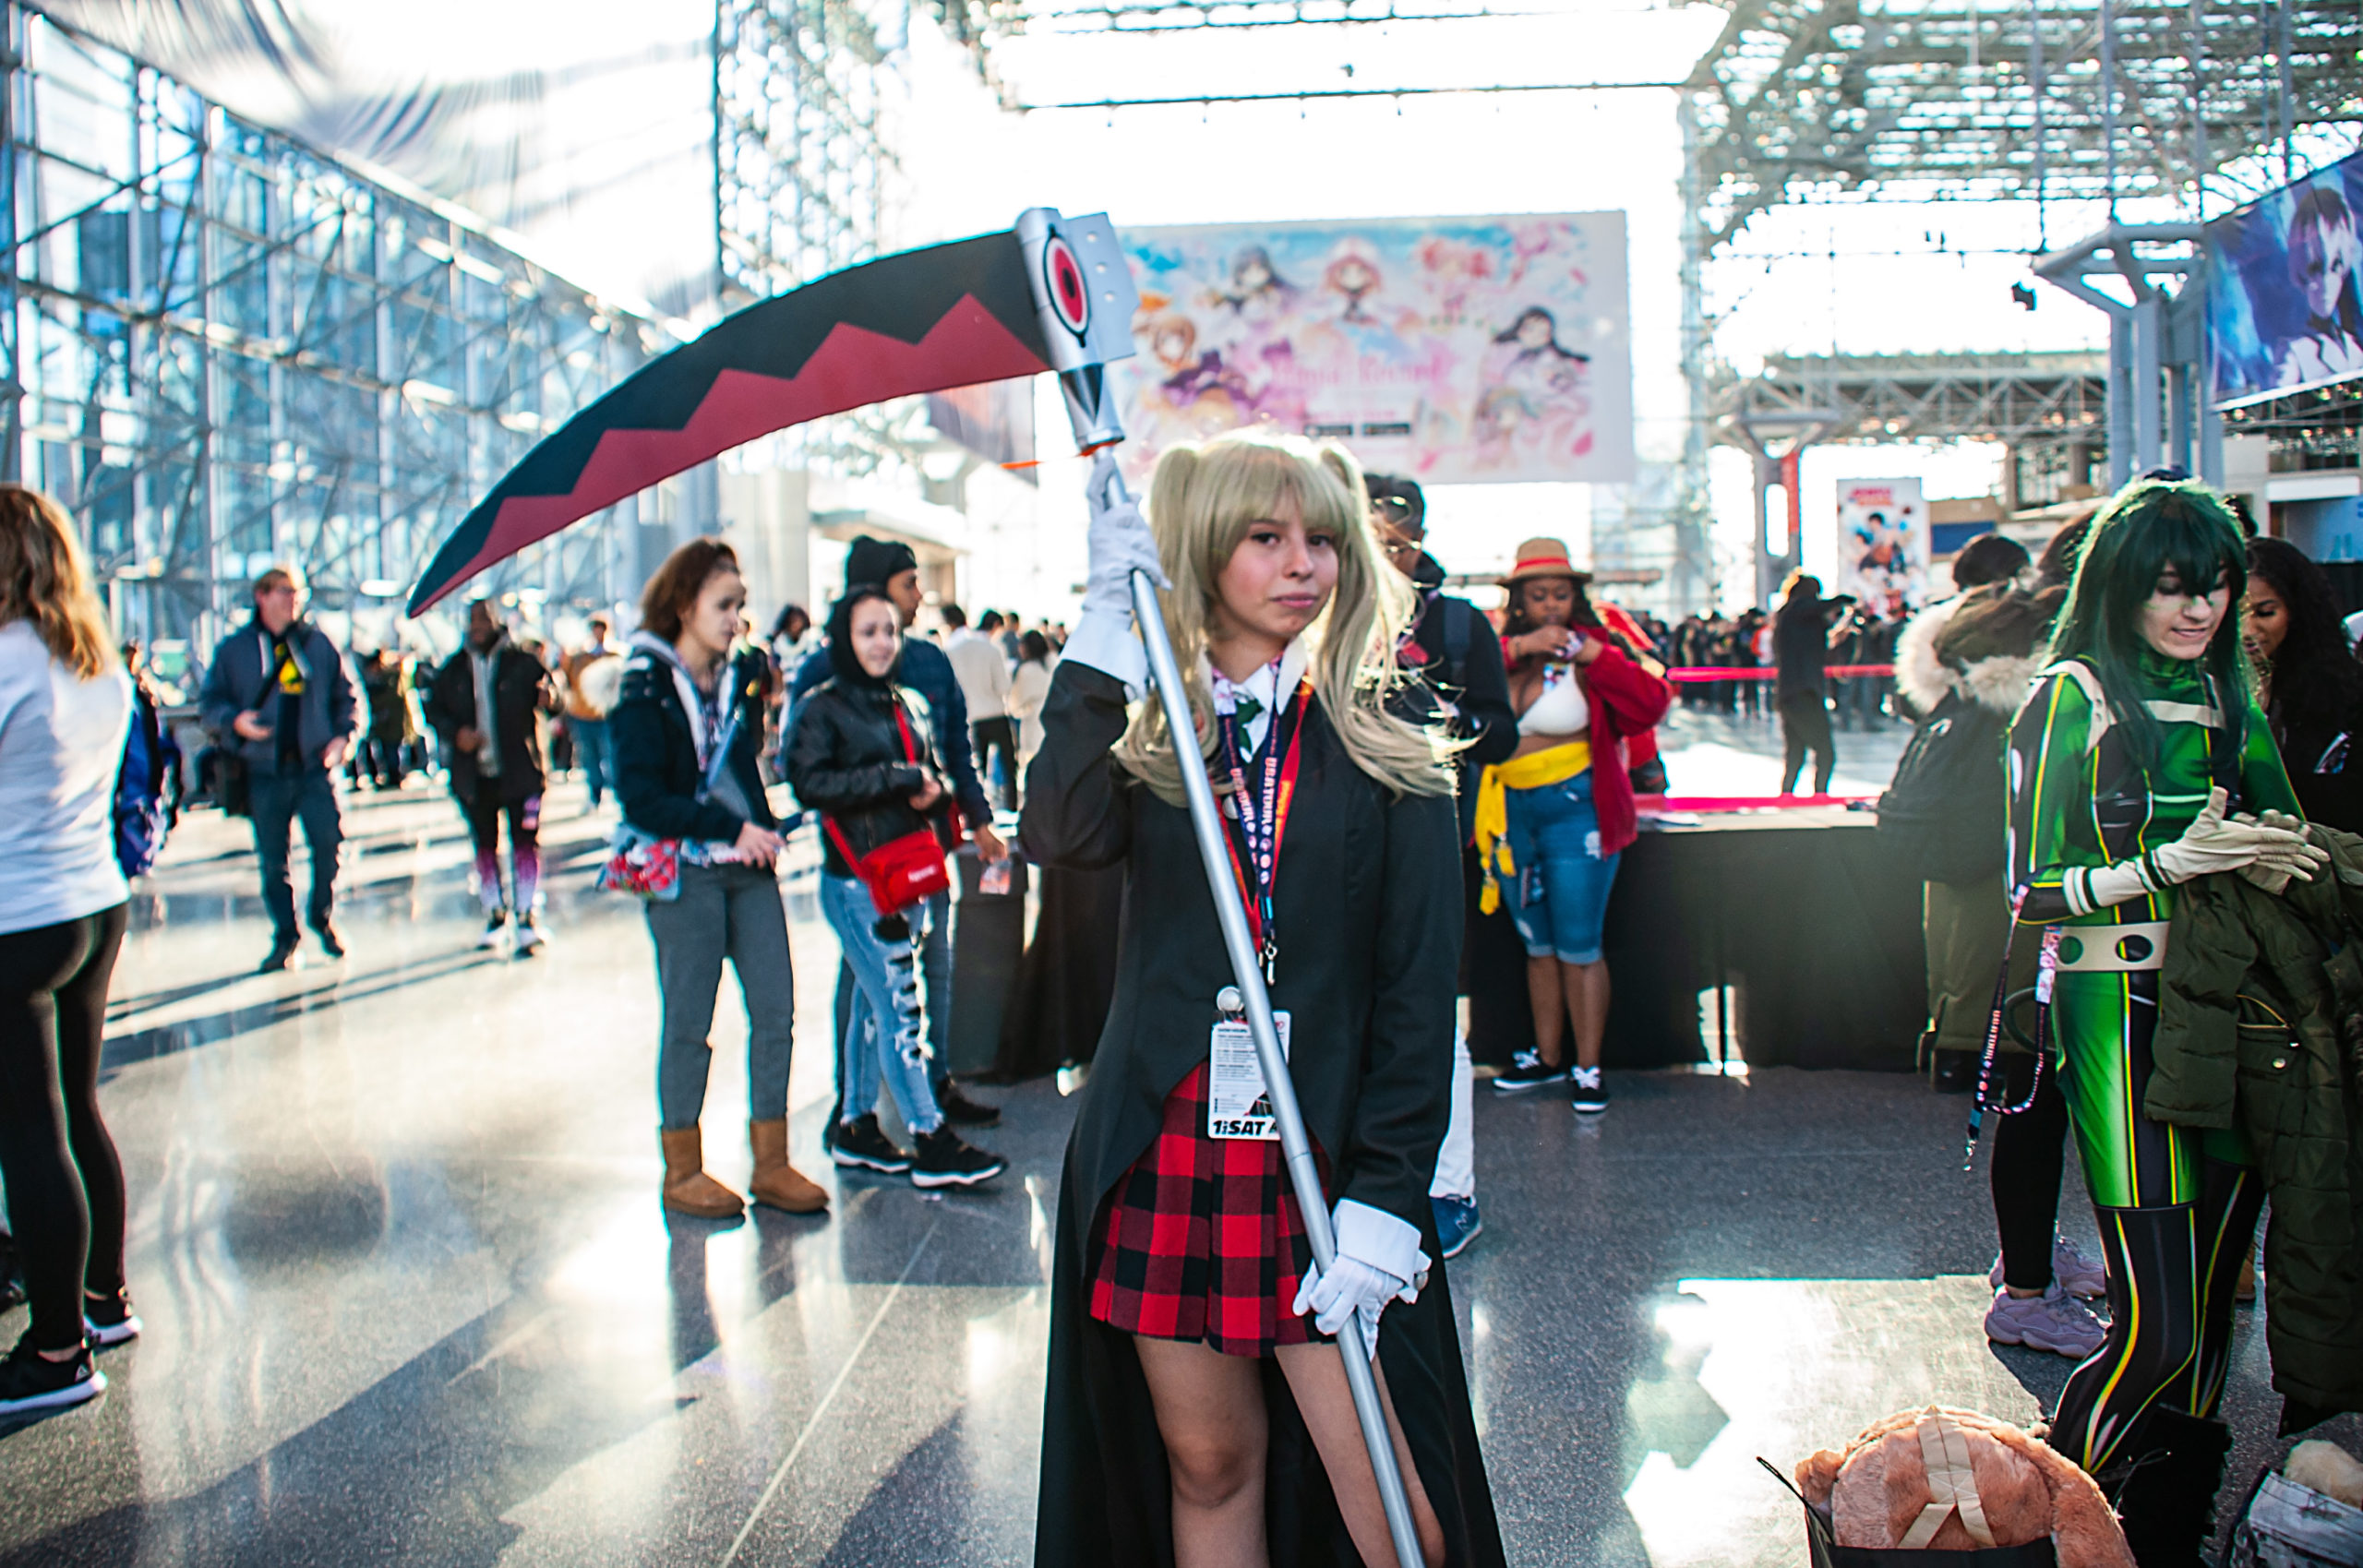 Maka Albarn Cosplay from Soul Eater by katos_